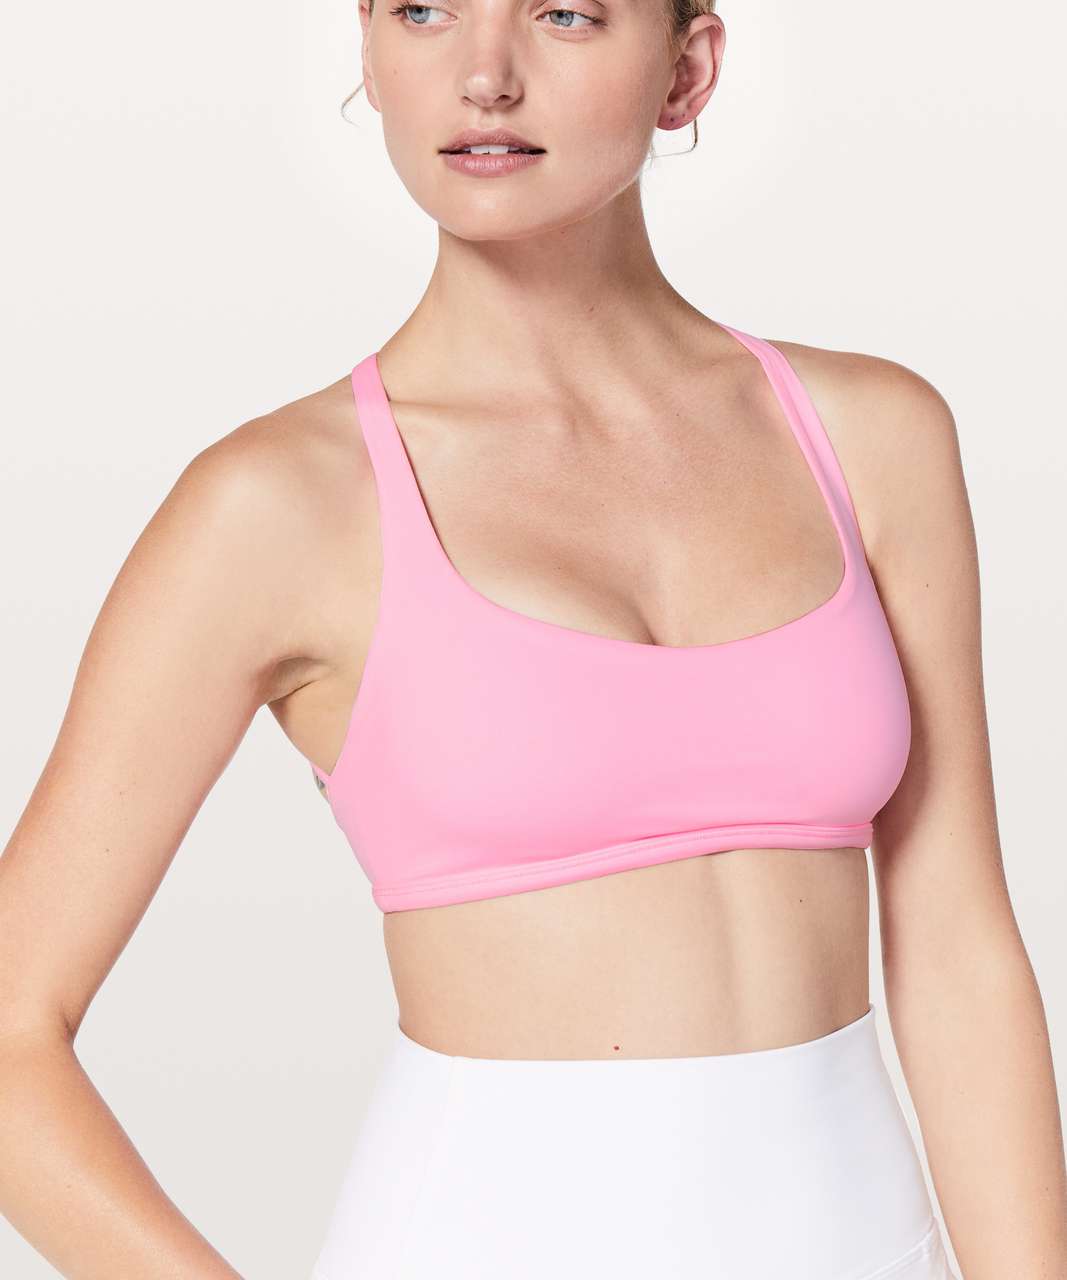 Lululemon Sports Bra 4 Pink - $27 (55% Off Retail) - From Taylor